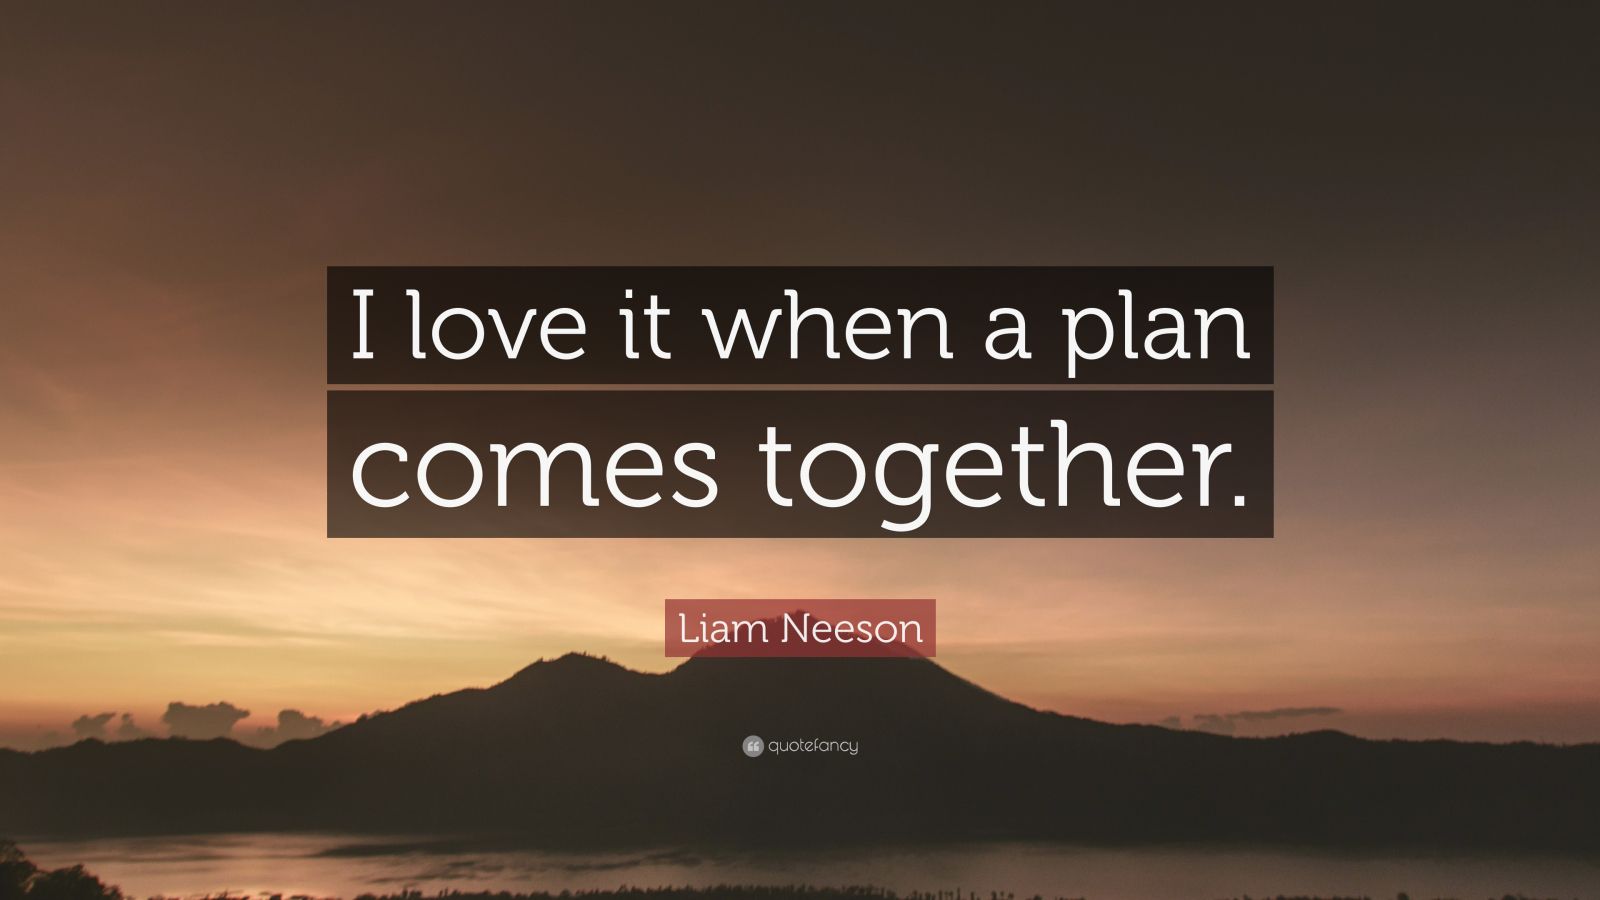 Liam Neeson Quote “i Love It When A Plan Comes Together ” 12